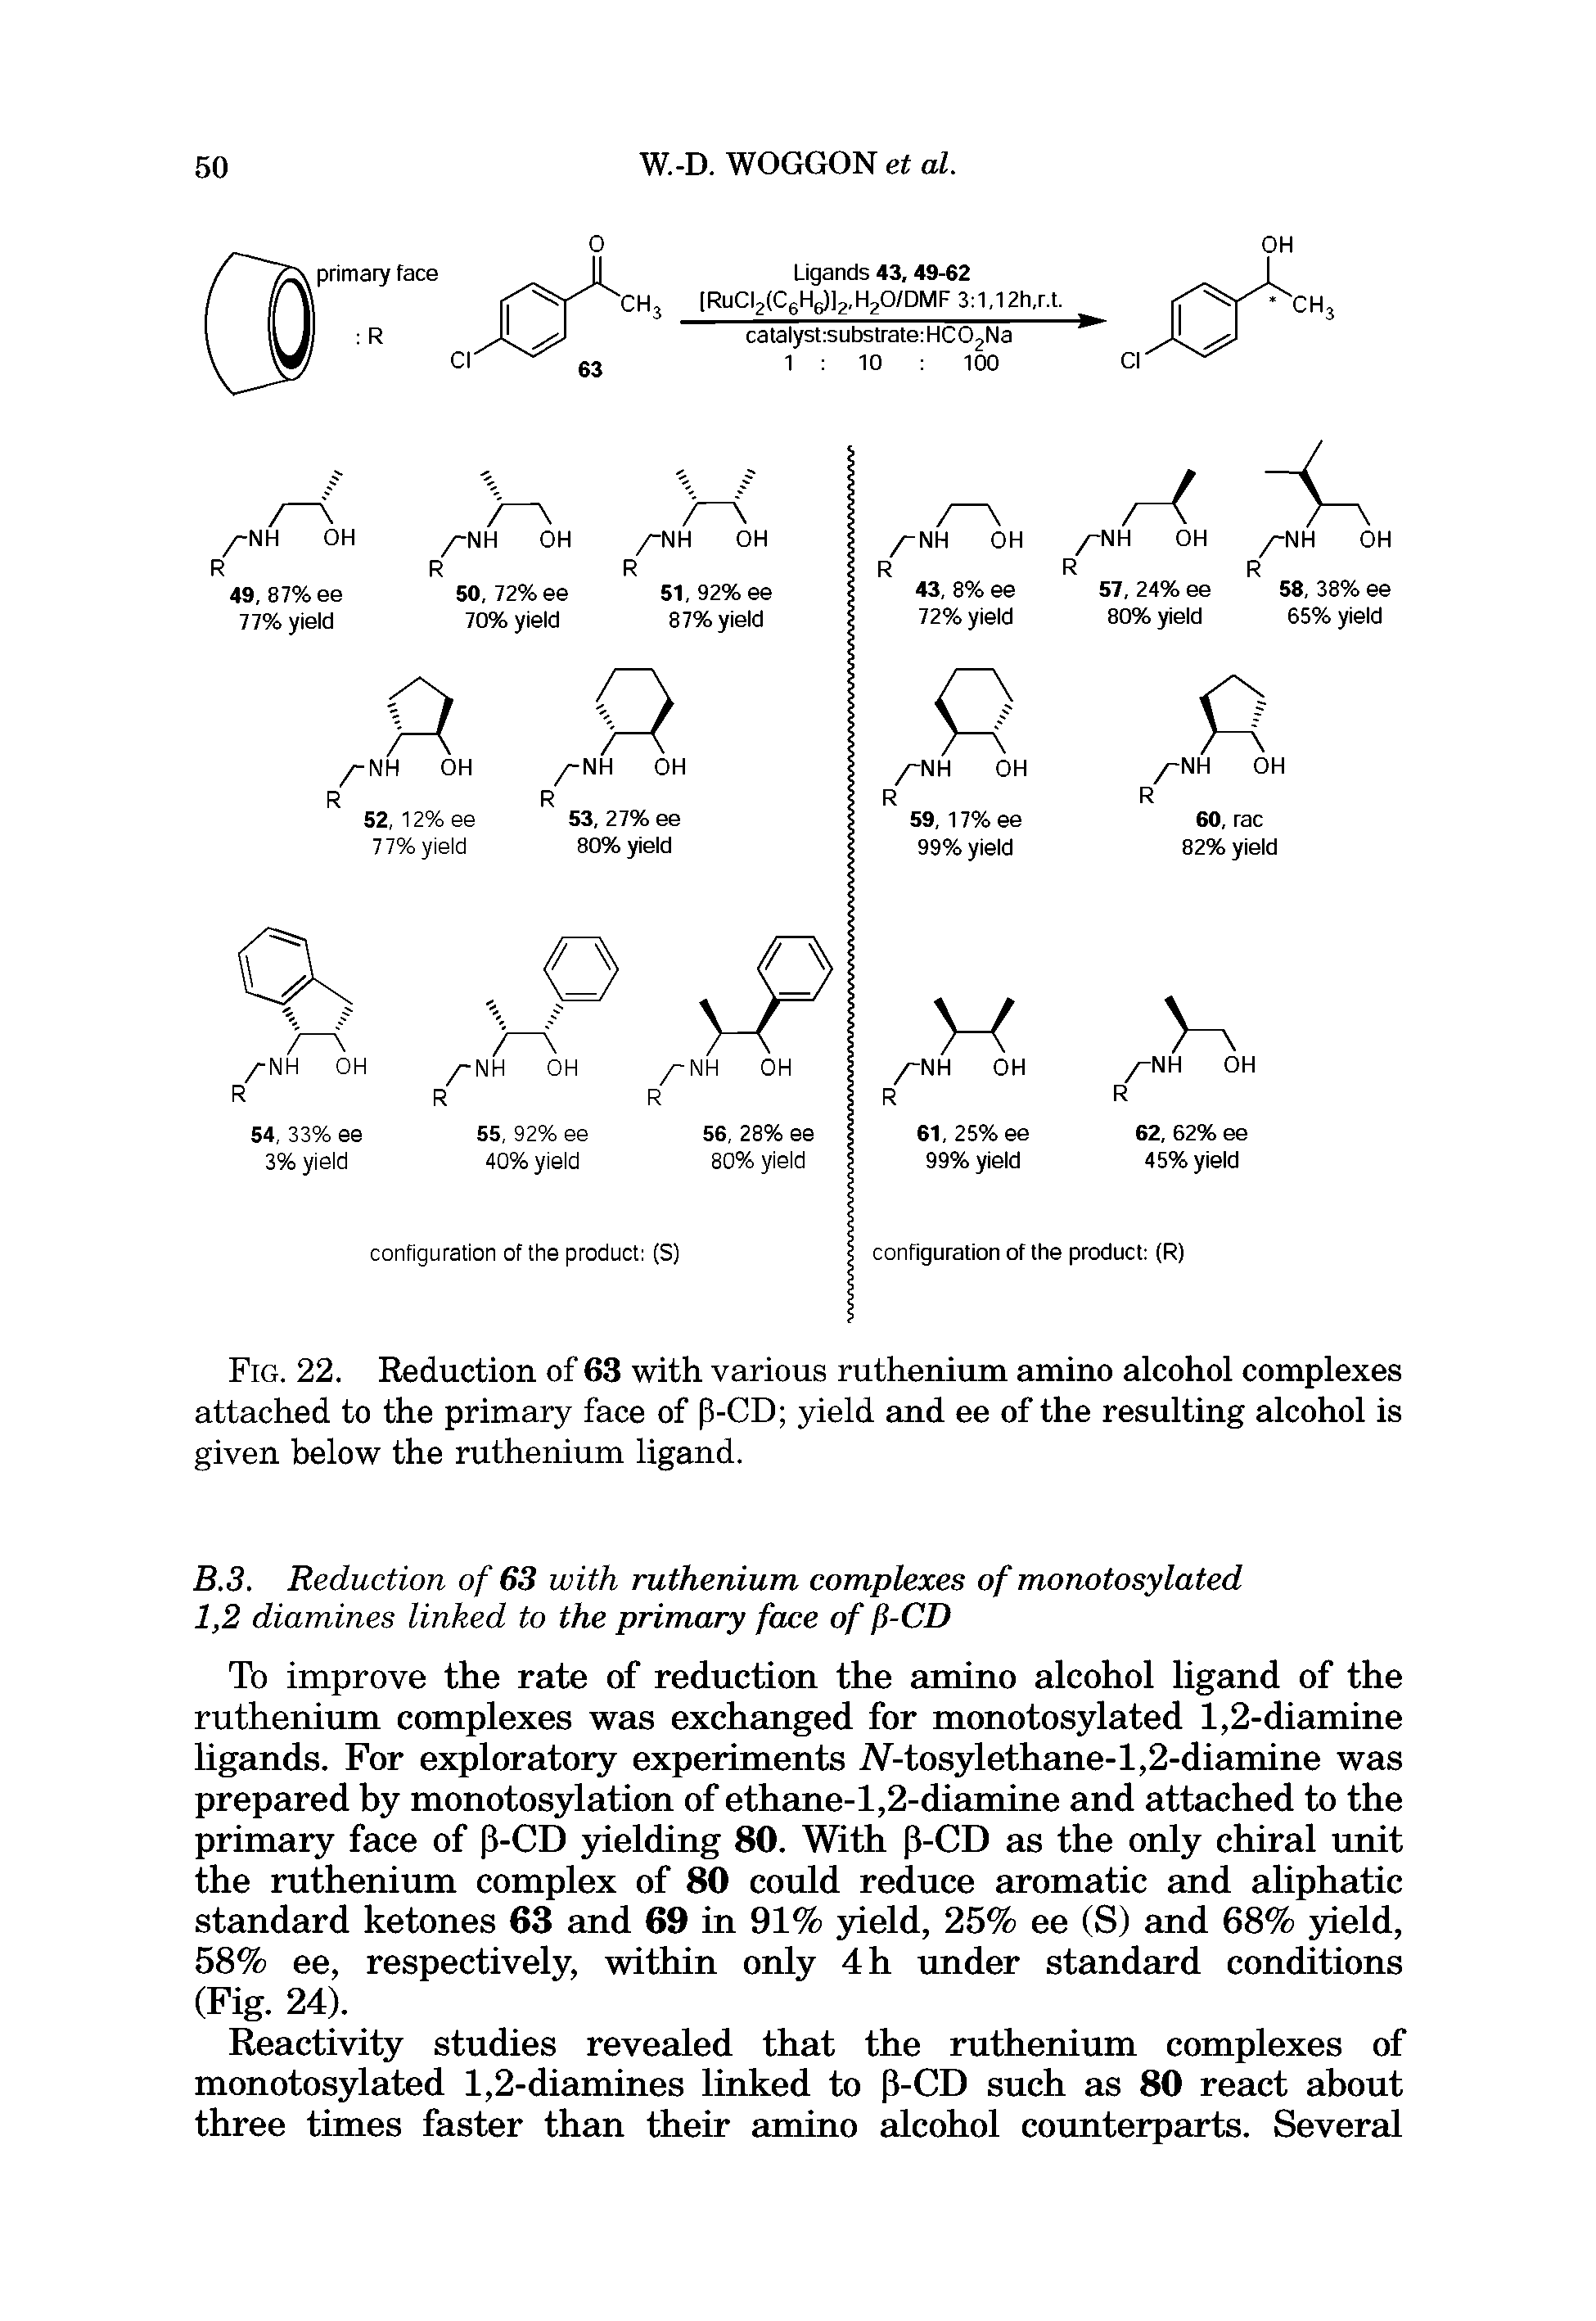 Fig. 22. Reduction of 63 with various ruthenium amino alcohol complexes attached to the primary face of p-CD yield and ee of the resulting alcohol is given below the ruthenium ligand.